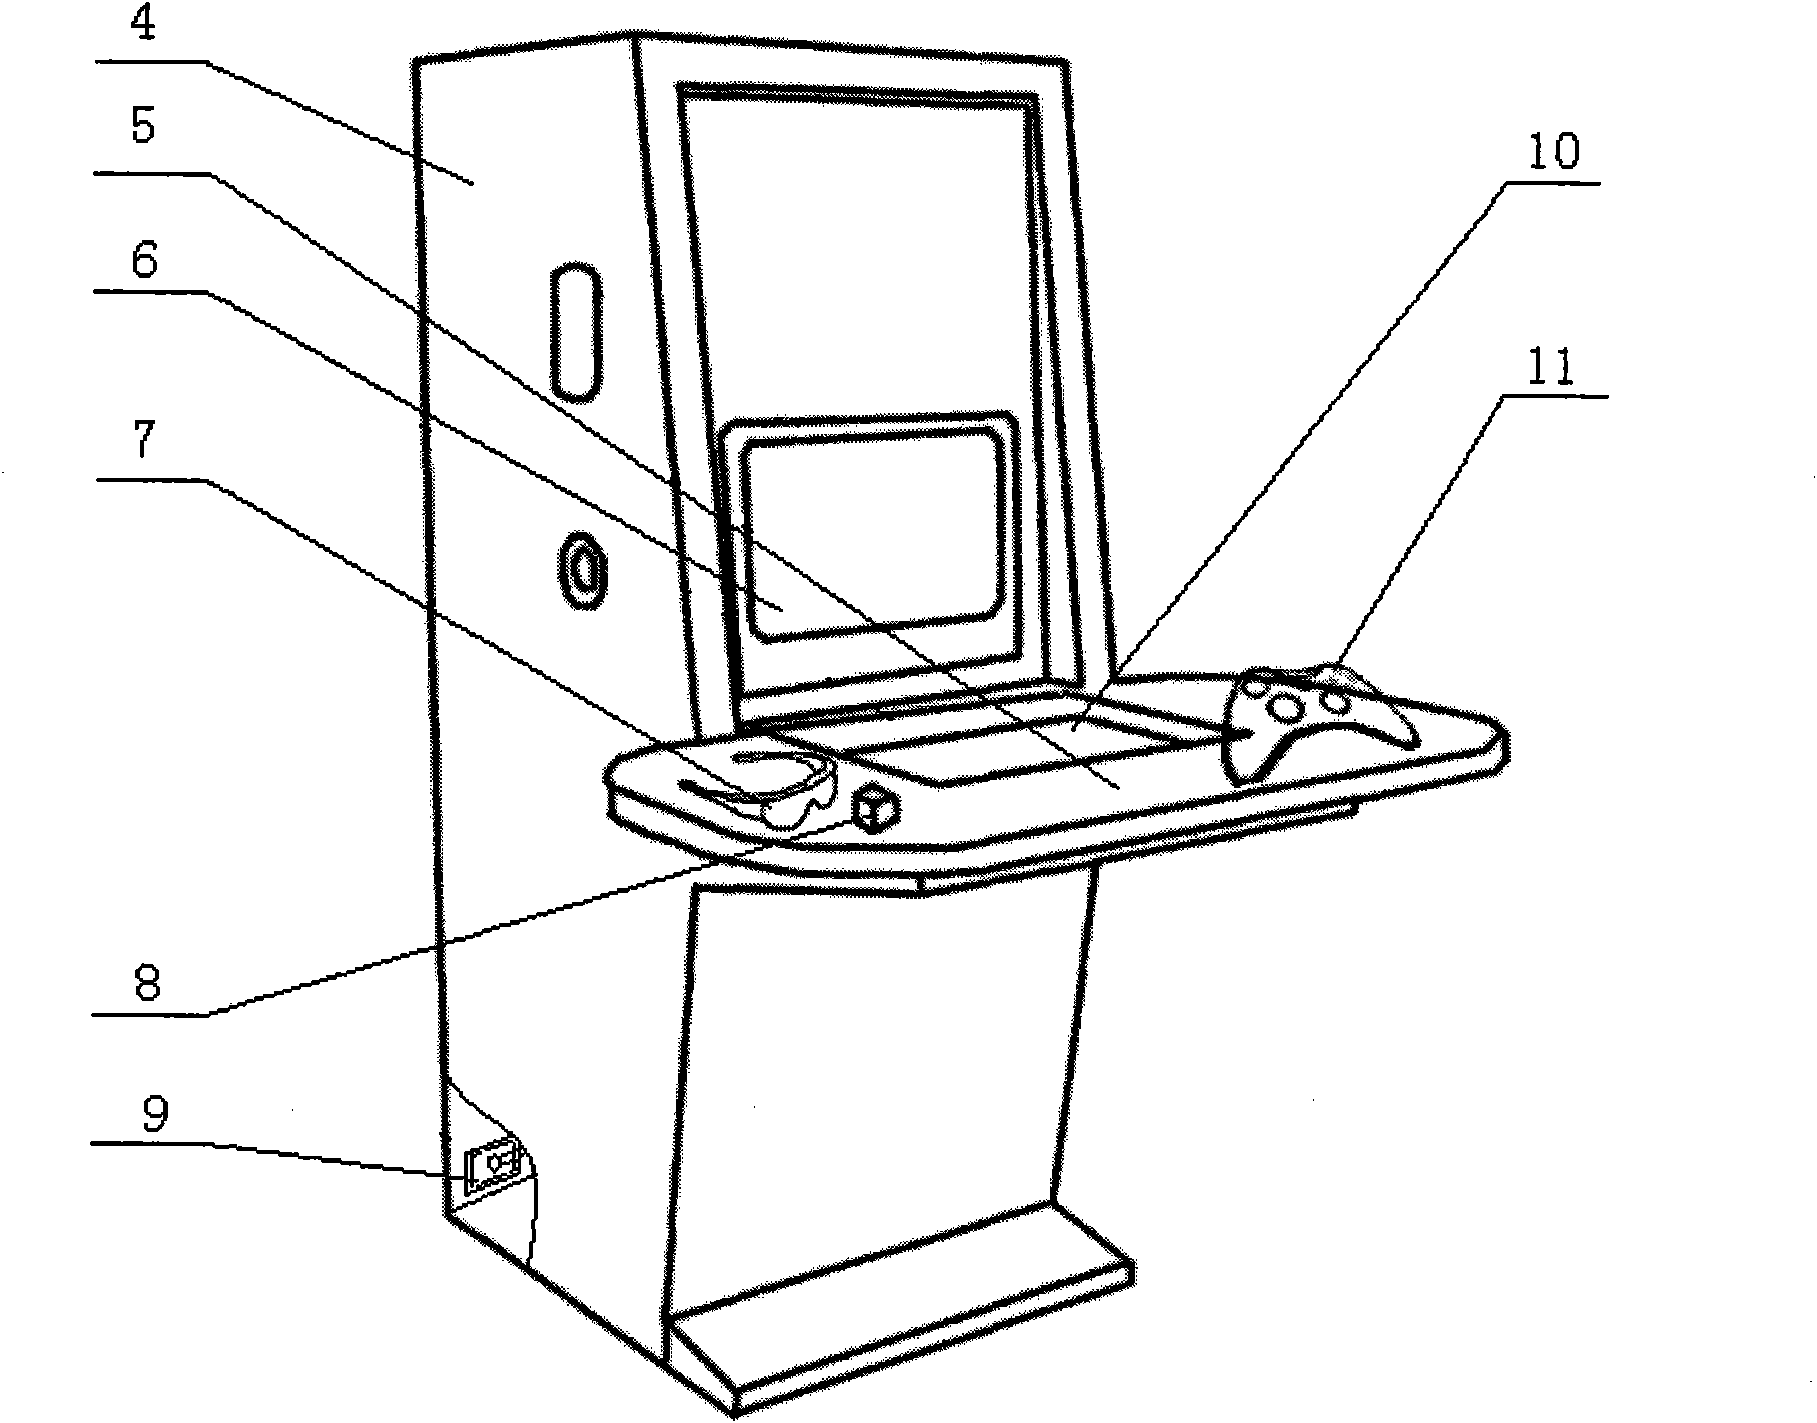 Live working table type simulation training system and method